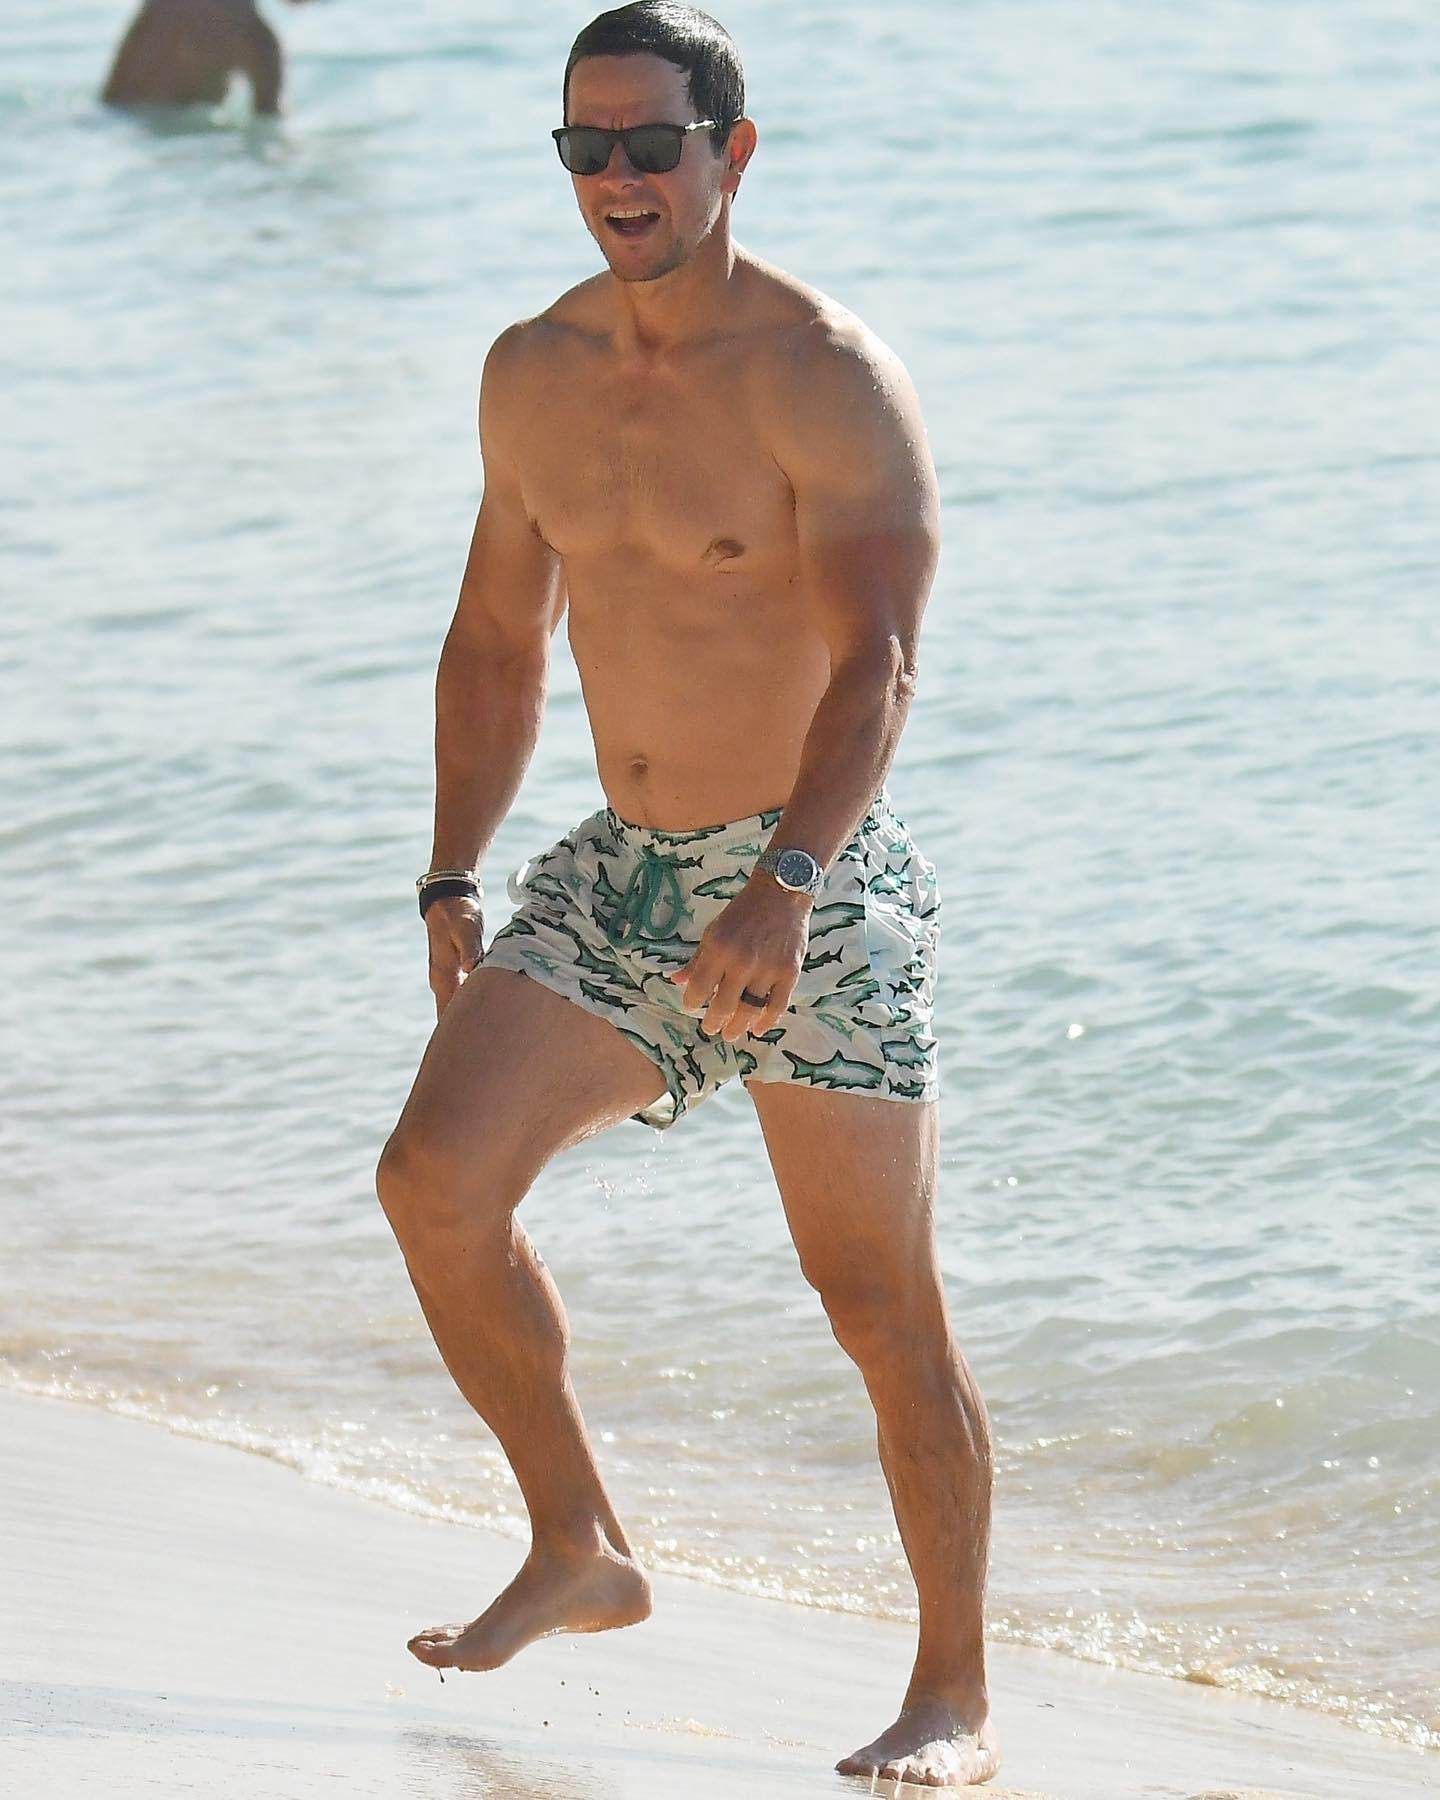 image  1 Just Jared - Mark Wahlberg sports a pair of shark-print swim trunks during another day at the beach